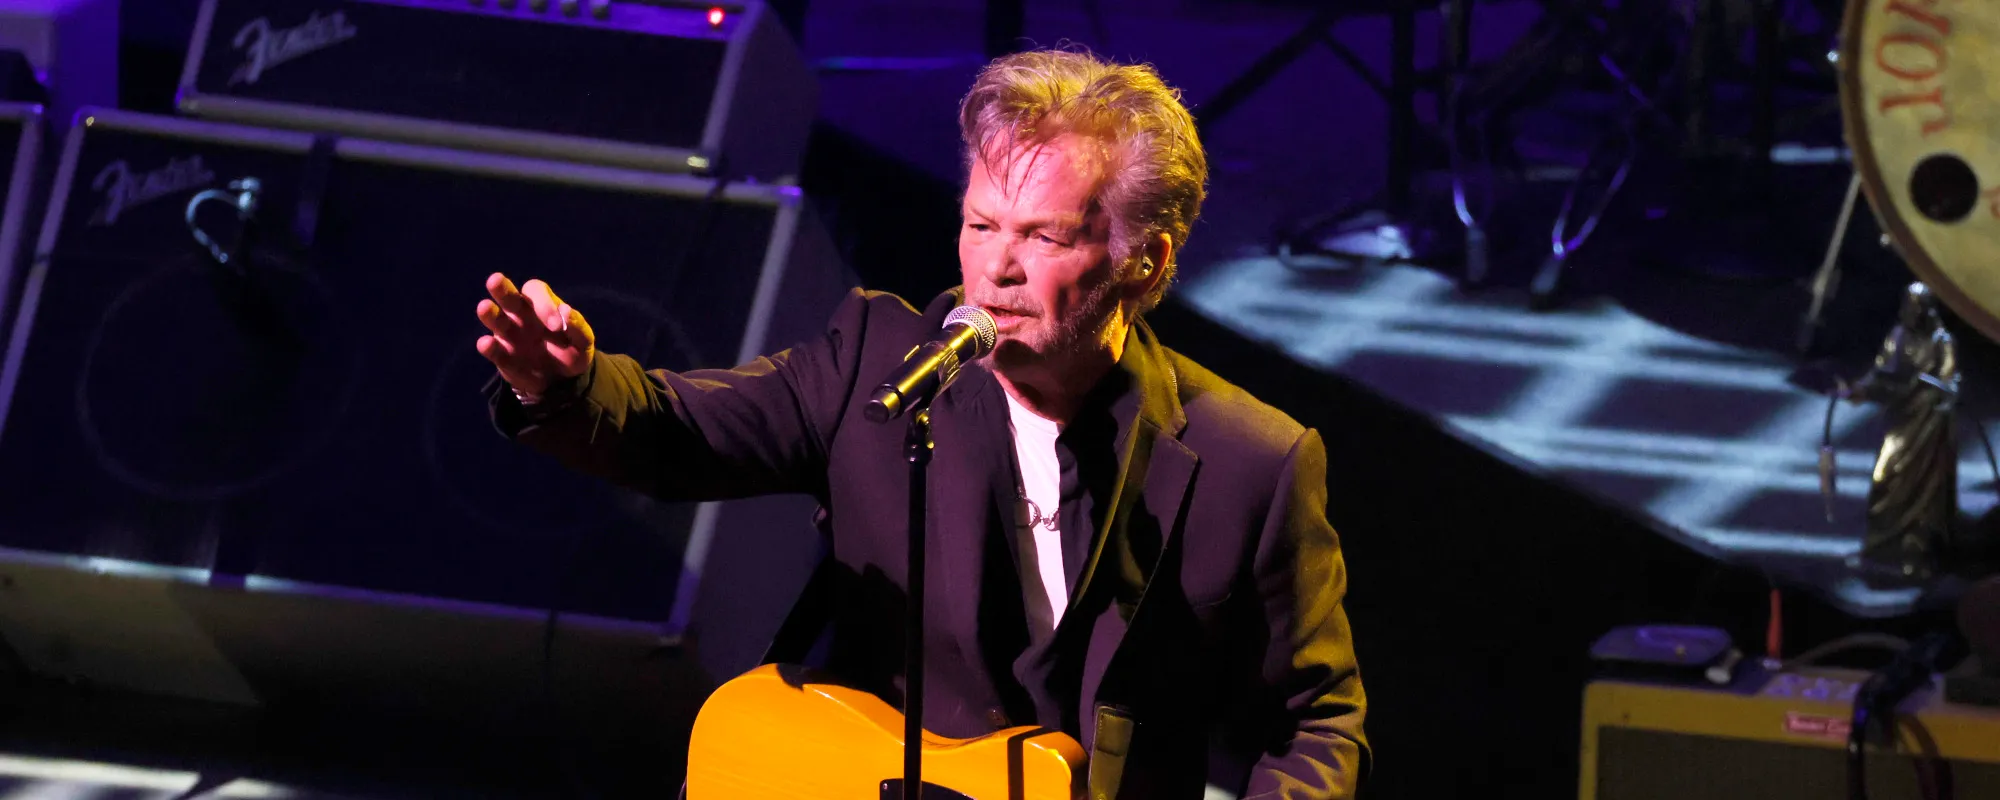 The Meaning Behind “Authority Song” by John Cougar Mellencamp and How It Mirrors His Struggles with the Record Industry